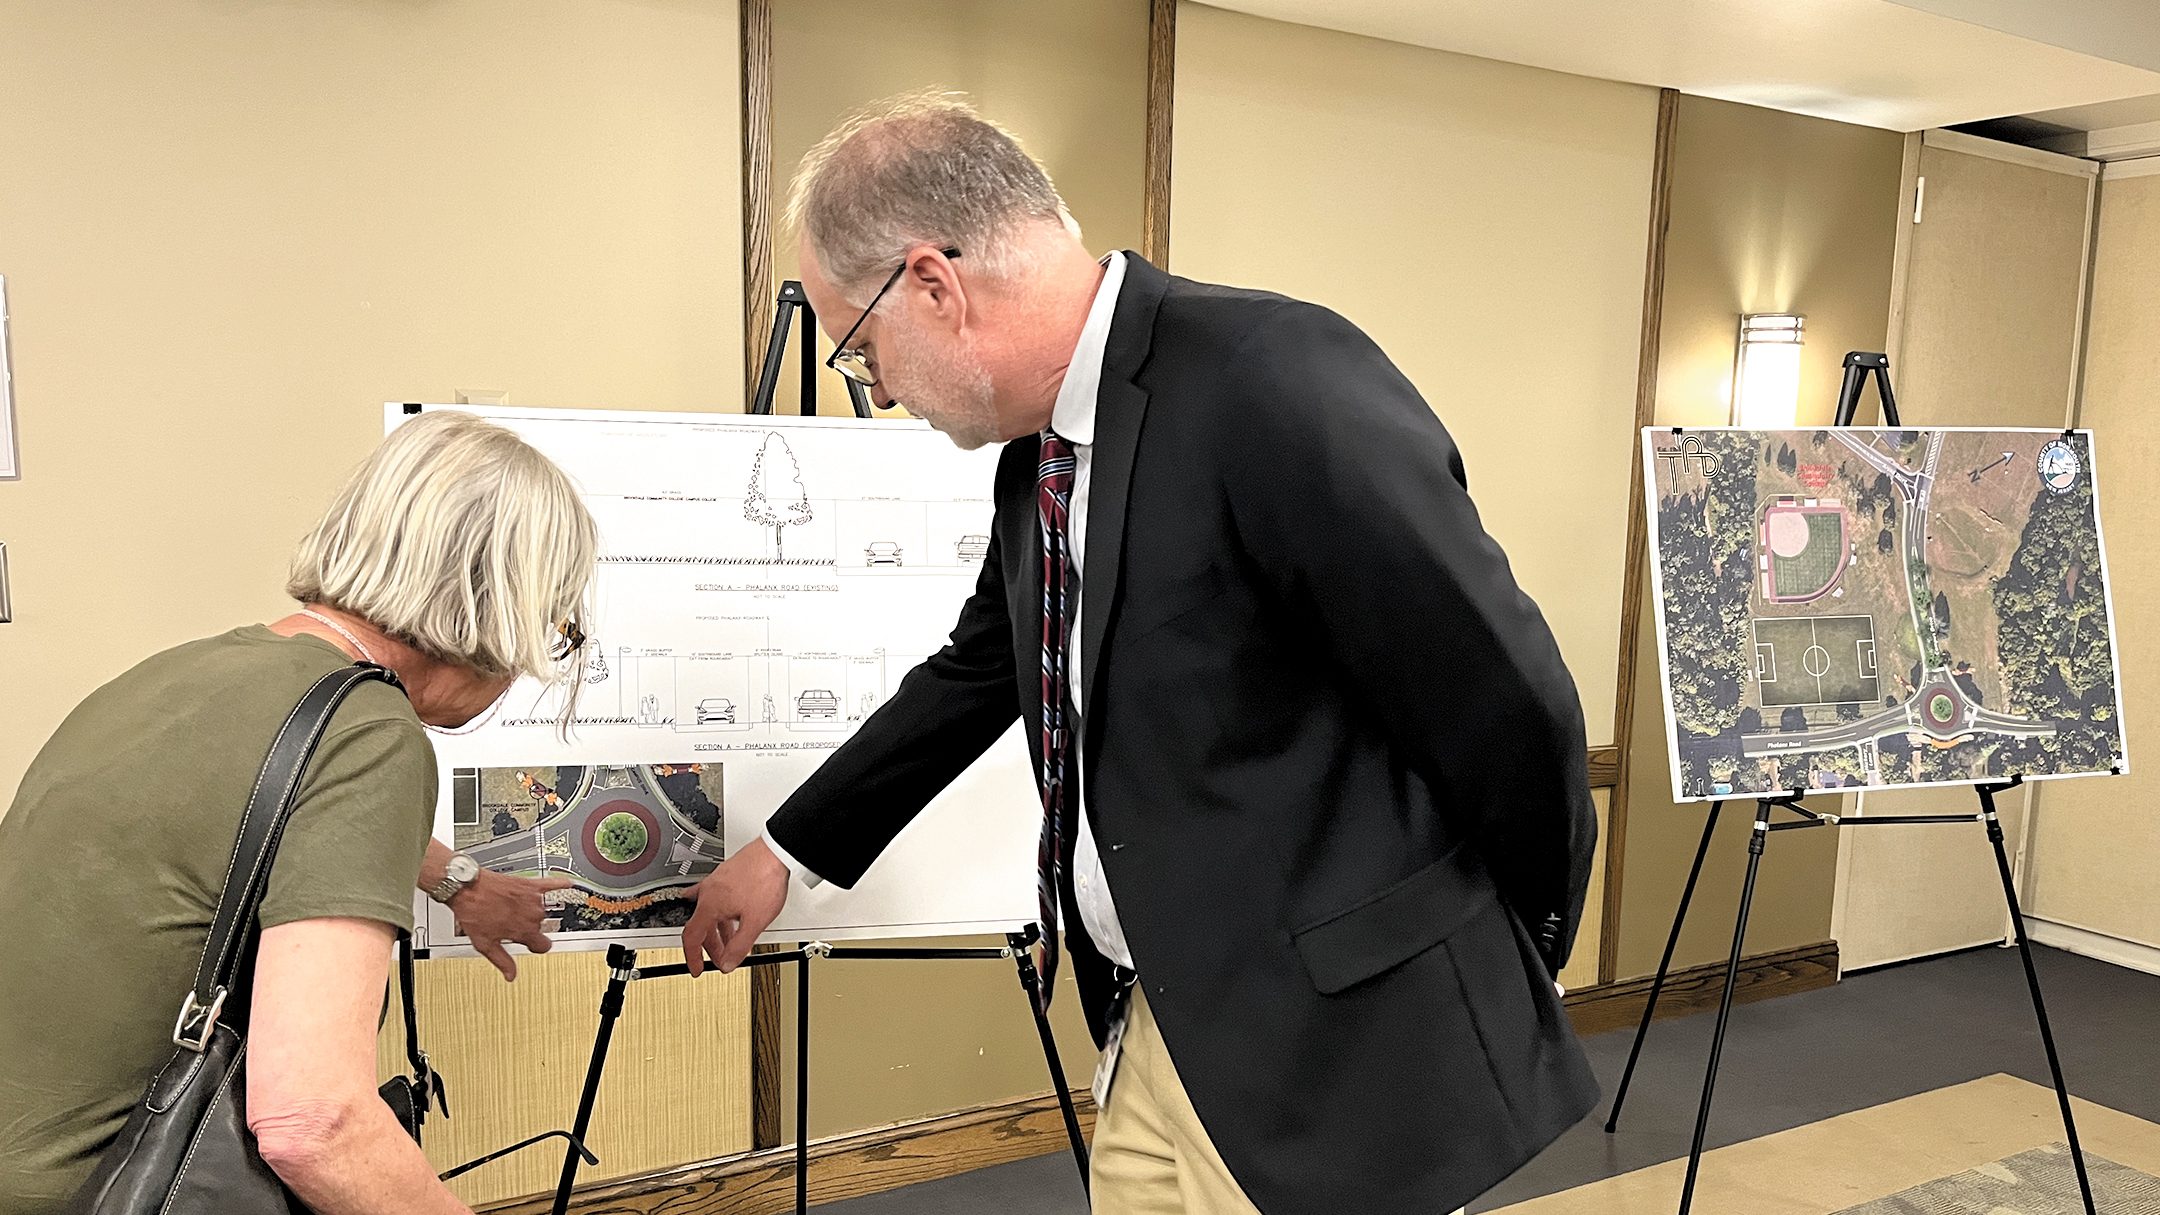 County engineer Michael Nei explained the function of a roundabout for managing traffic flow at the intersection of Phalanx Road and Campus Drive during a public input session at Brookdale’s Student Life Center. Sunayana Prabhu 